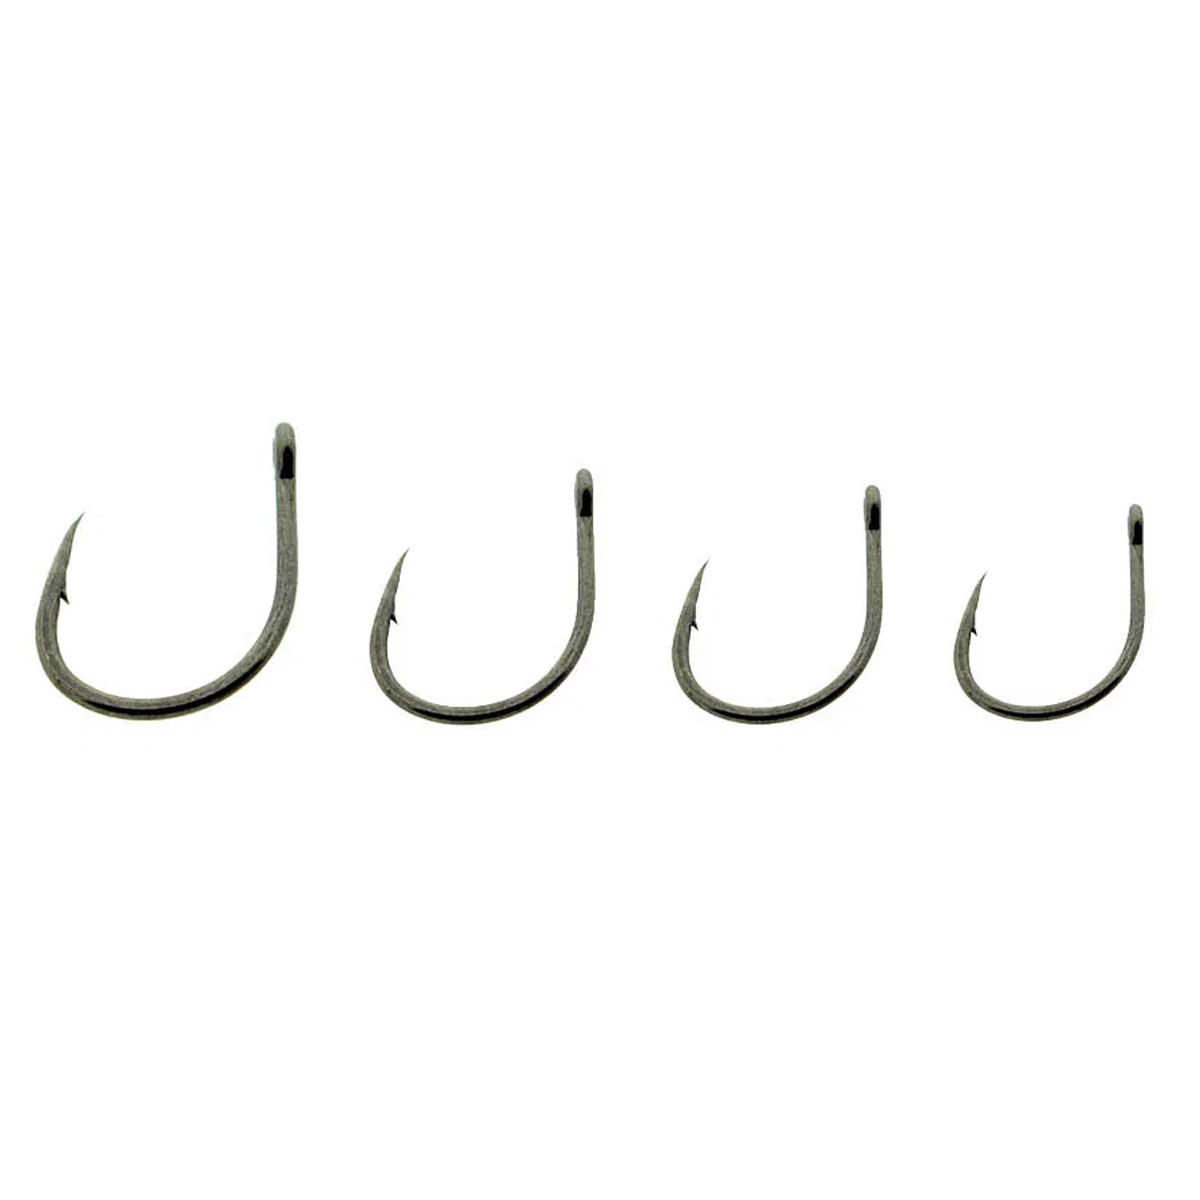 PB Products Wide Circle Hook PTFE